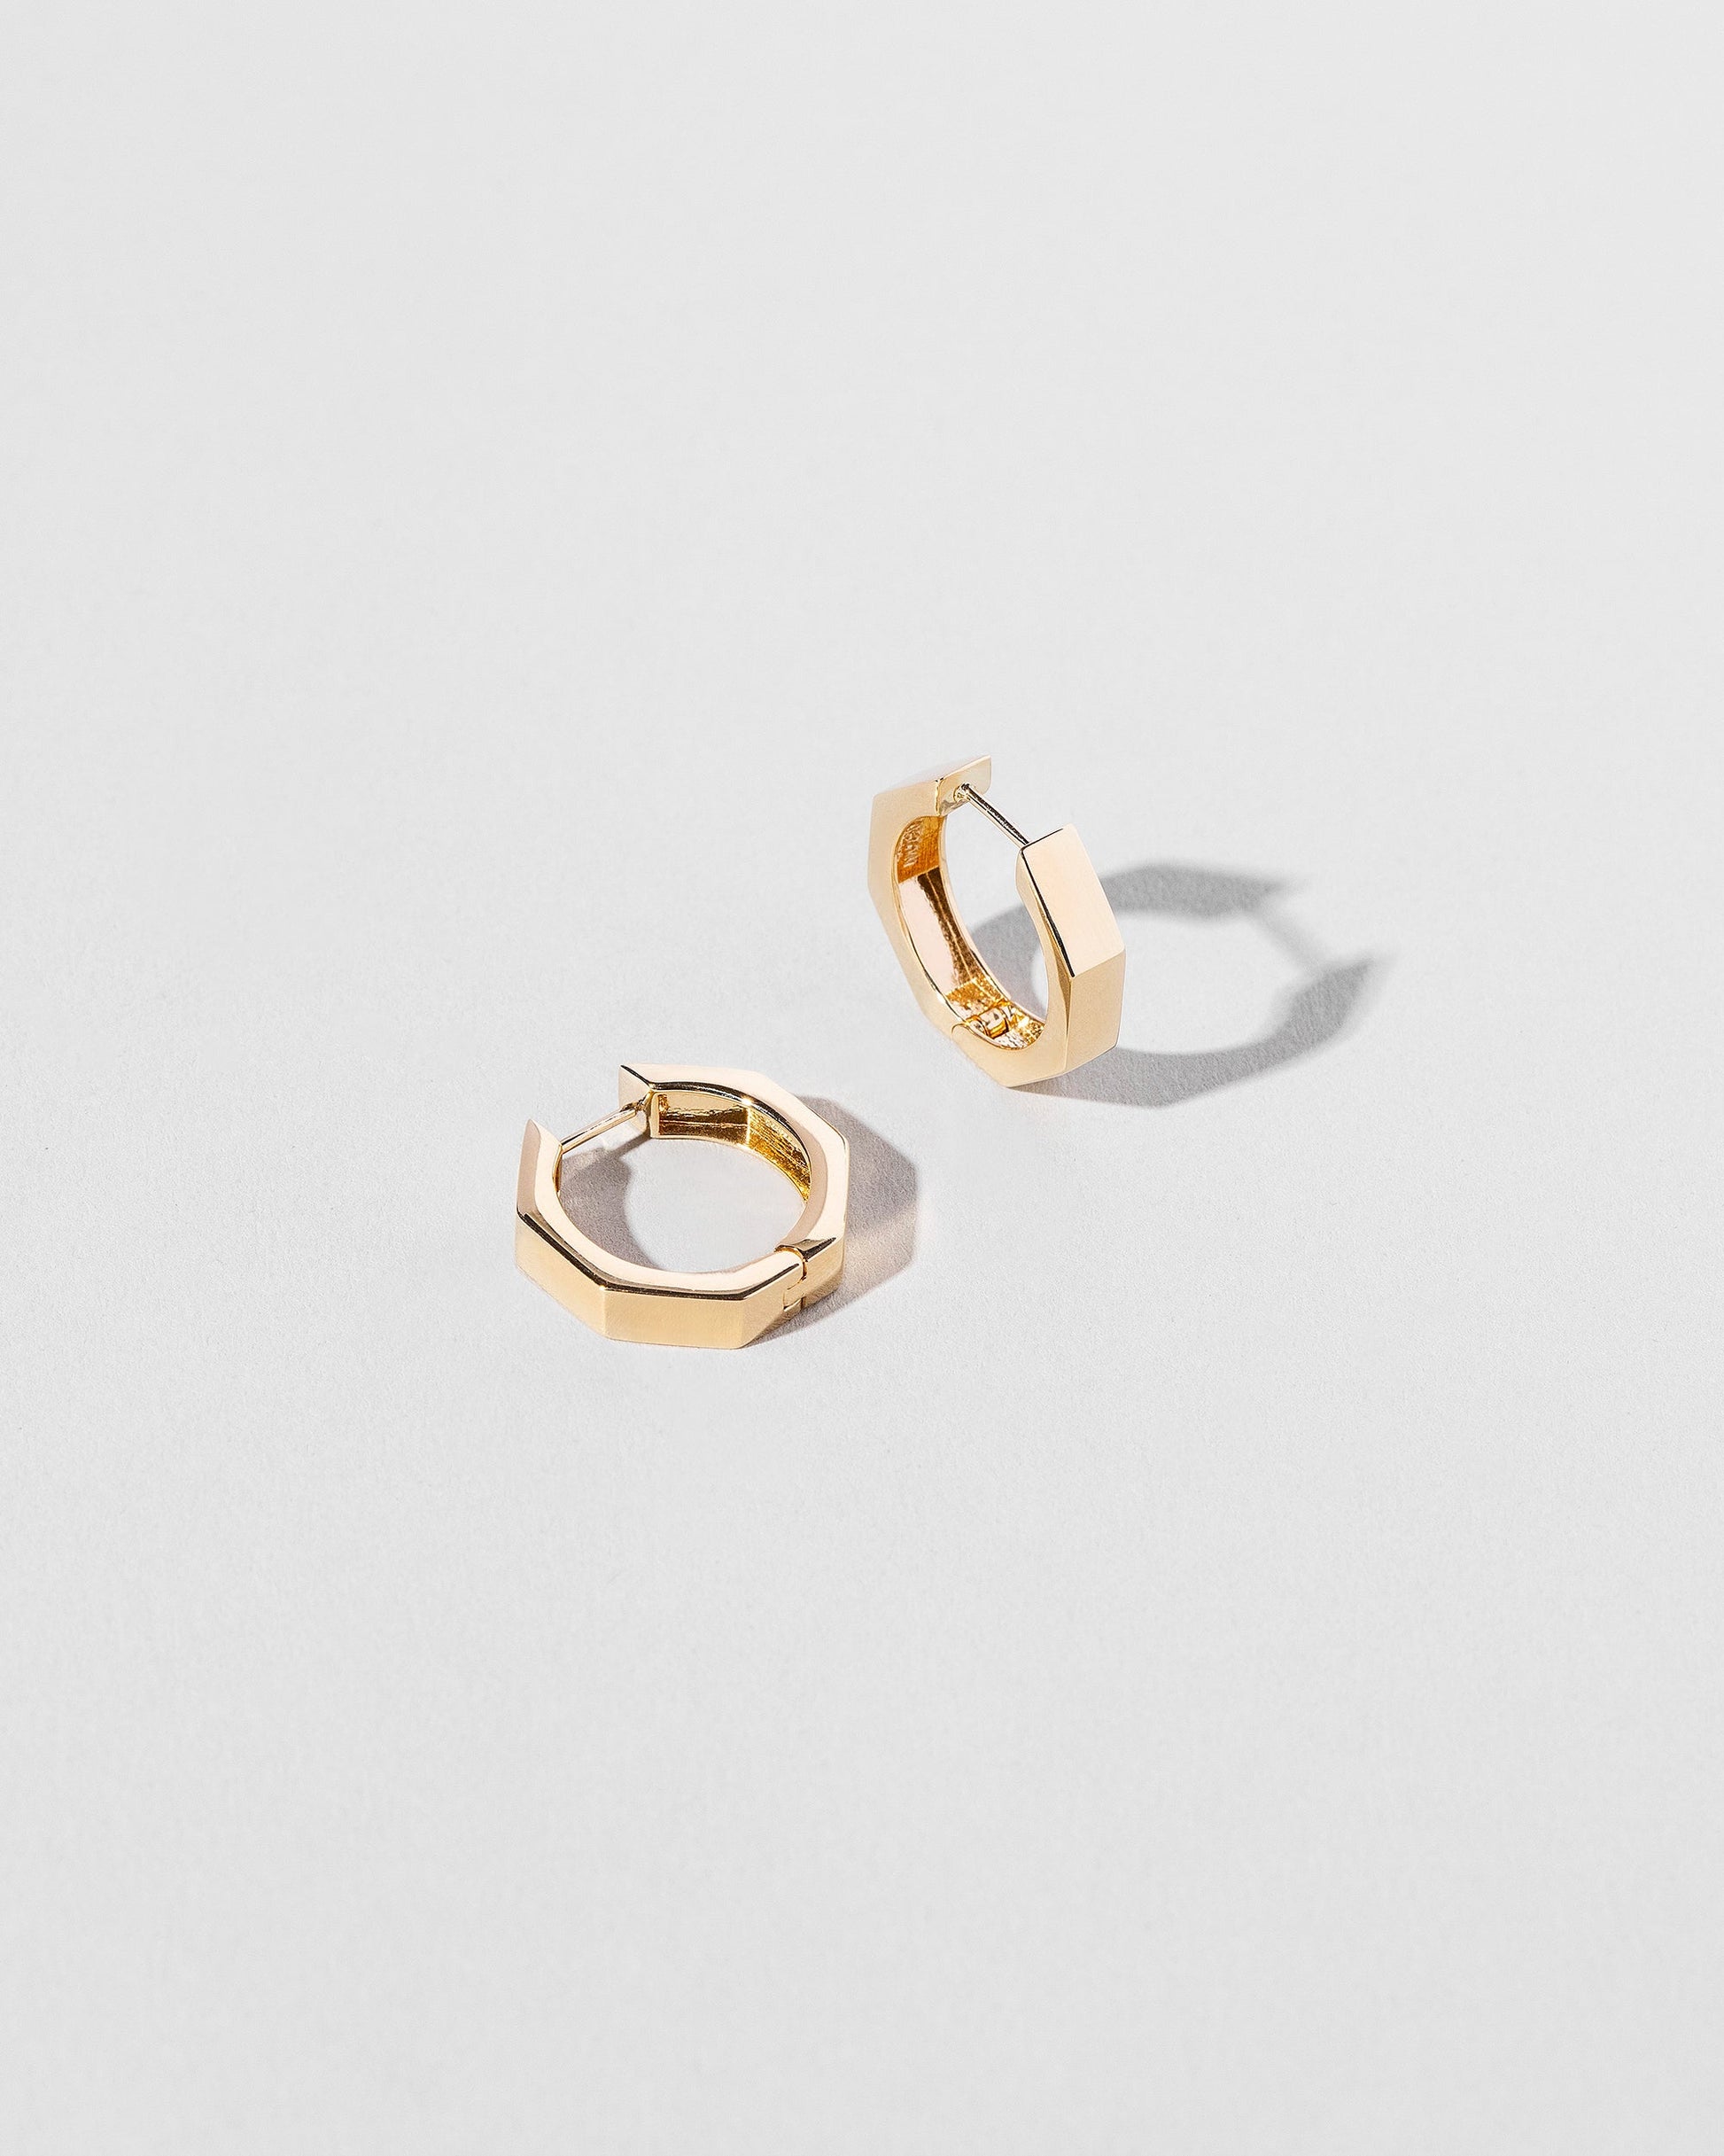 Gold Hoop Earrings 18mm Gold Filled Hoops Small Gold Hoop Earring Simple  Everyday Small Hoops Women Men Everyday Gold Hoops Jewelry Gift 